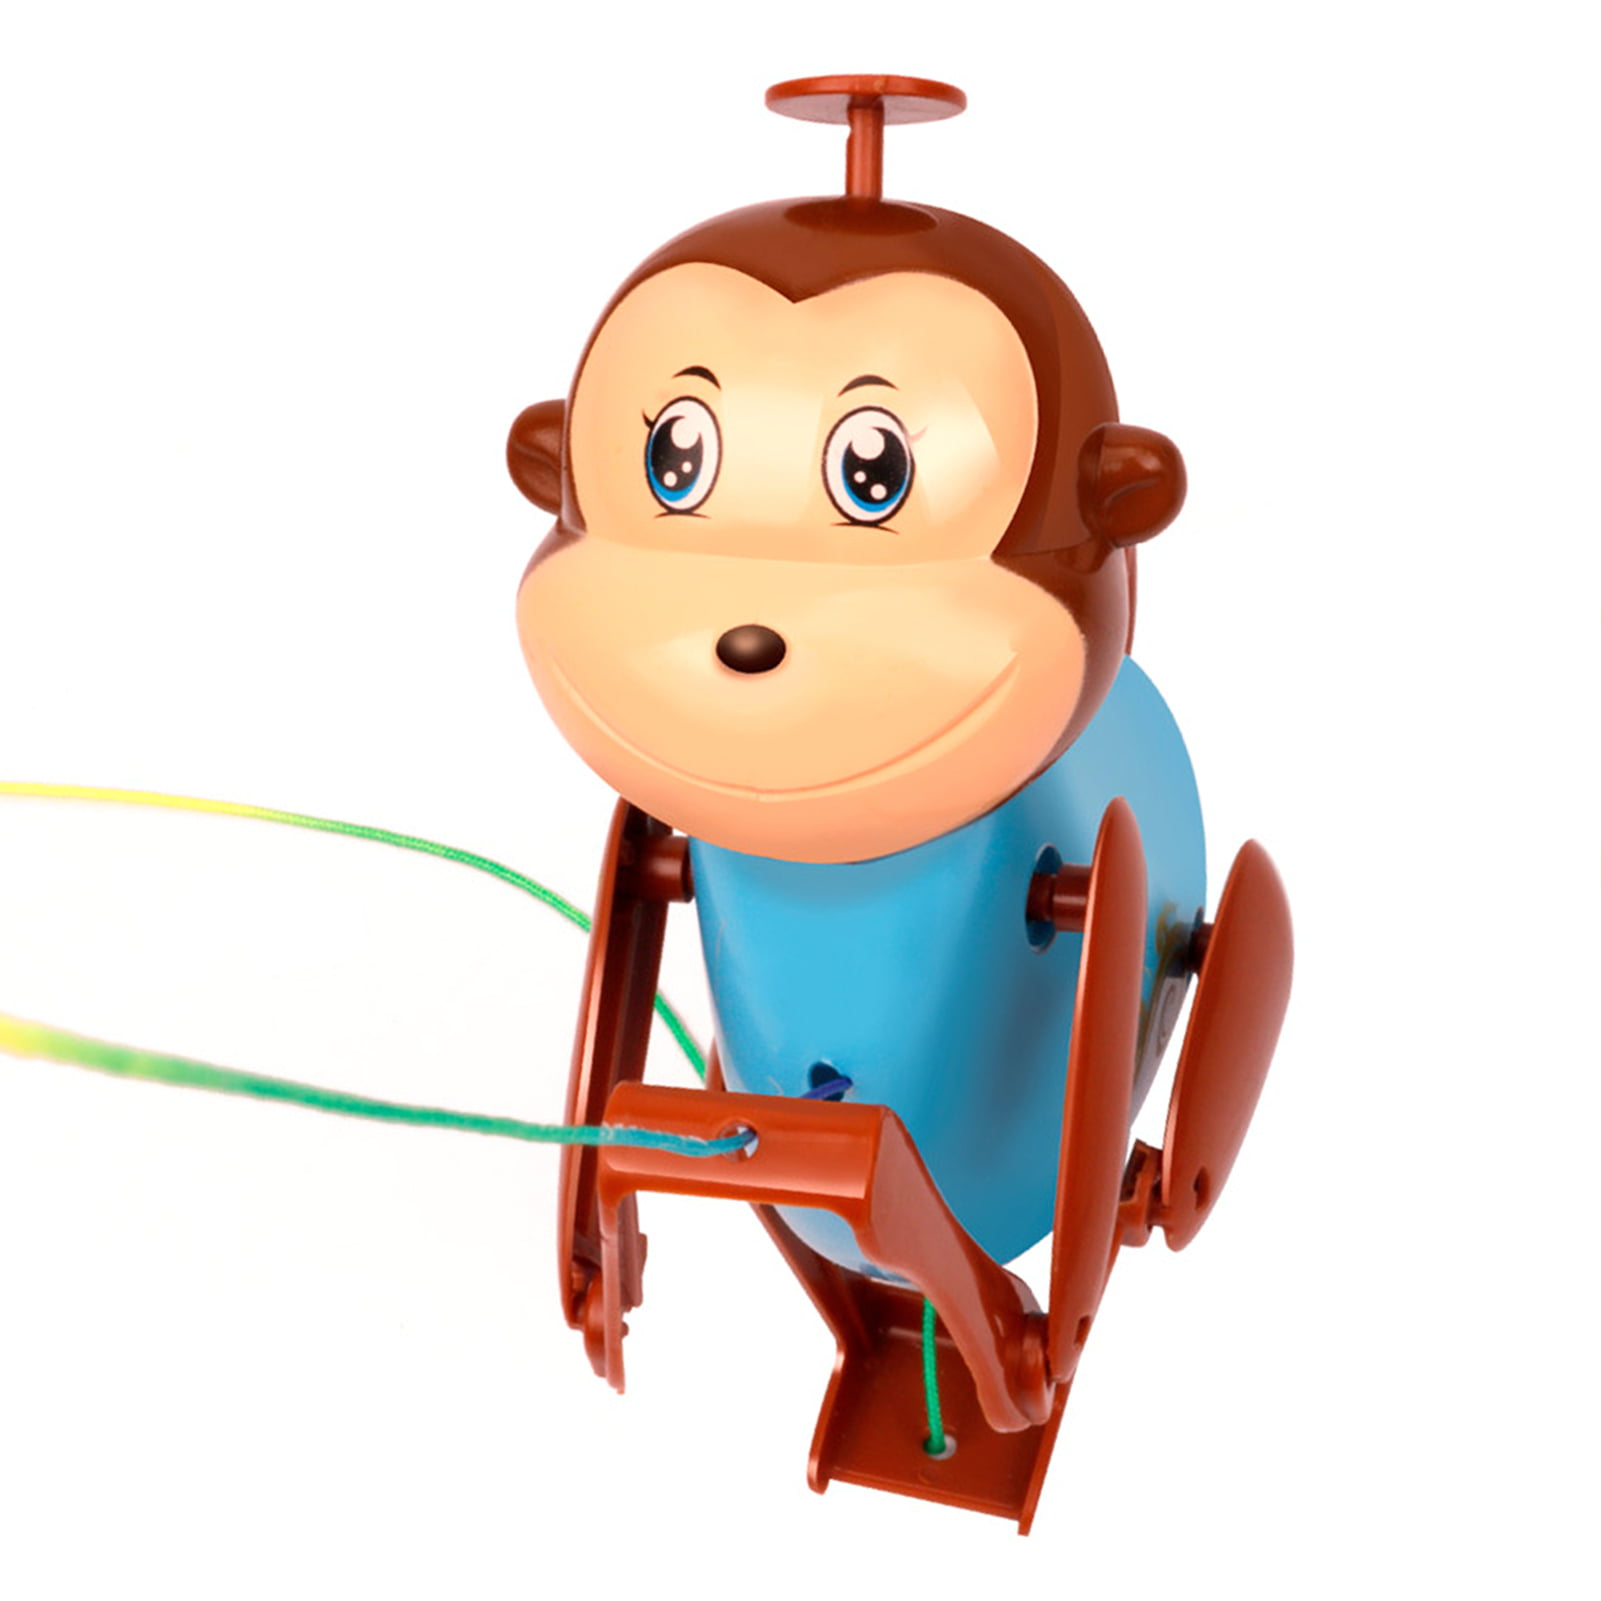 Blue Pull-and-Climb Baby Monkey Toy Fun Interactive Toy for Toddlers Wfinau String-Climbing Monkey Toy Hanging Monkey Toy